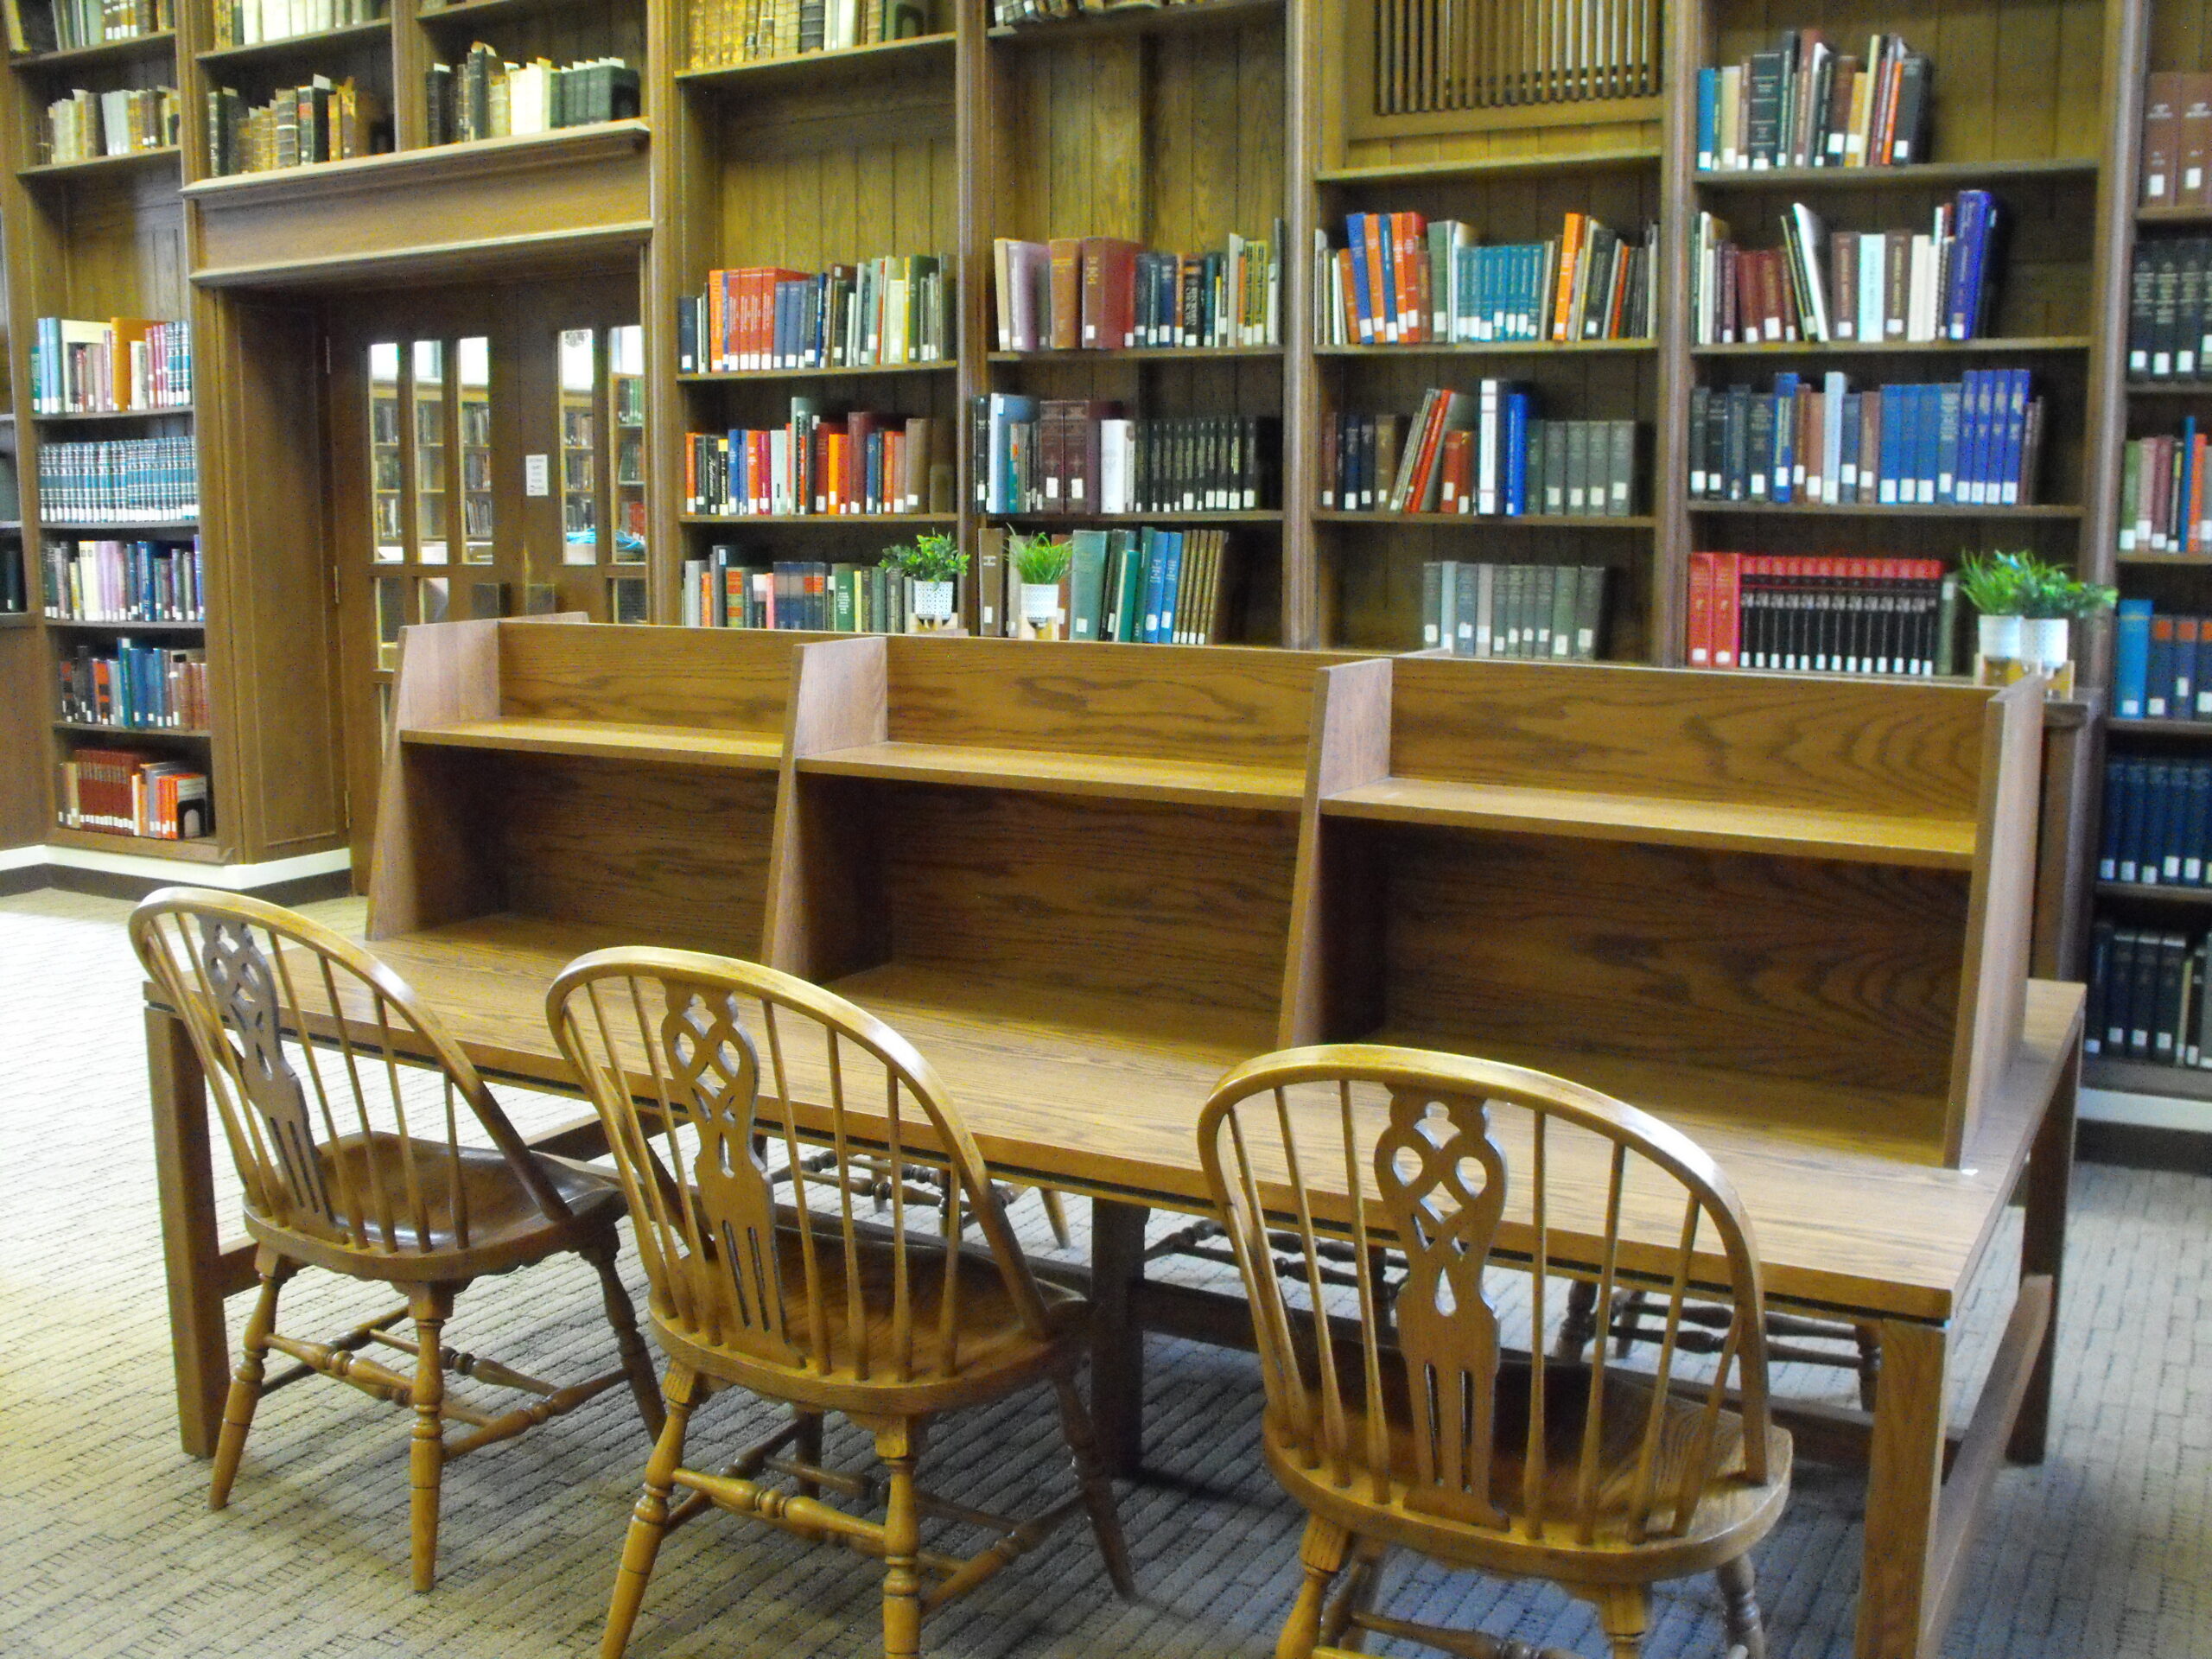 Photo of study carrells in Styberg Library